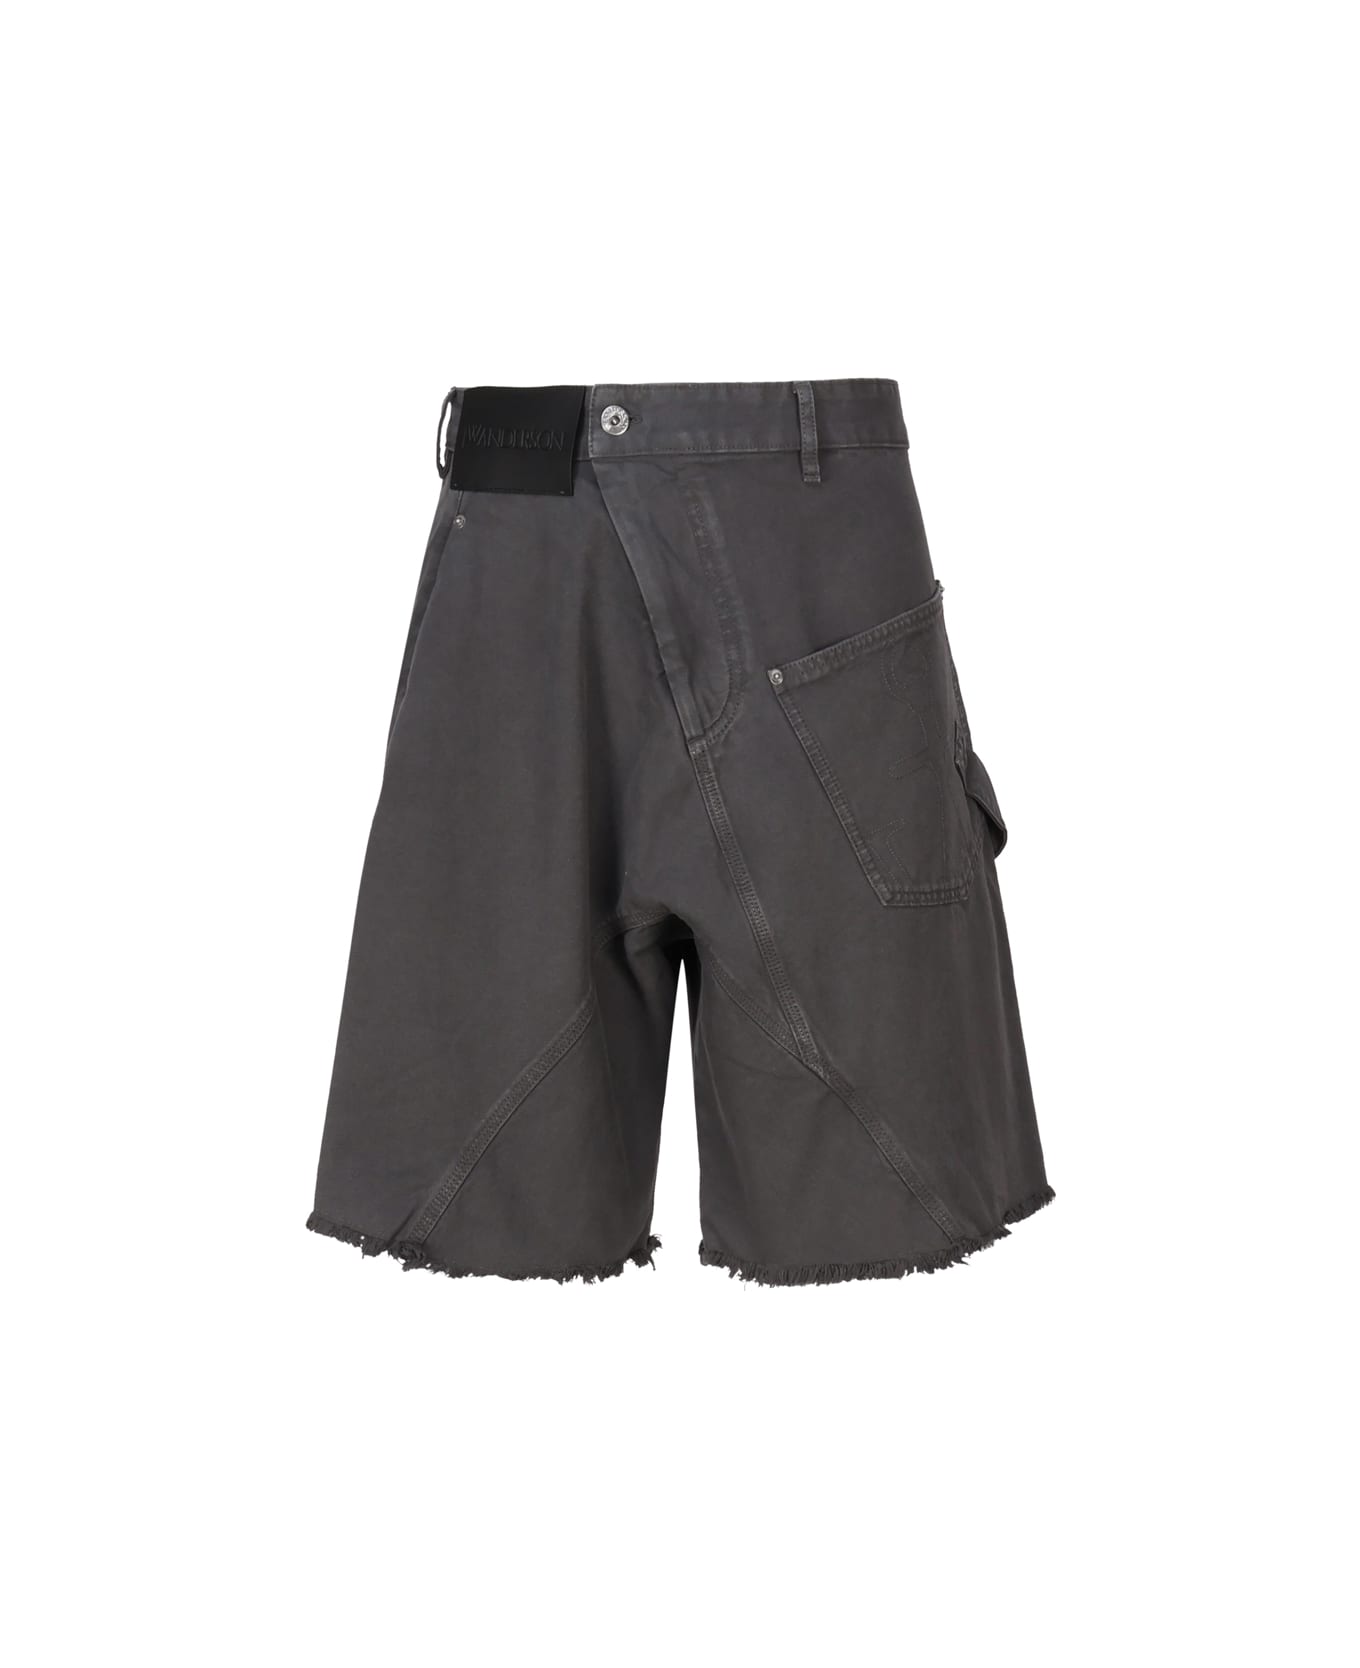 J.W. Anderson Deconstructed Shorts - Grey